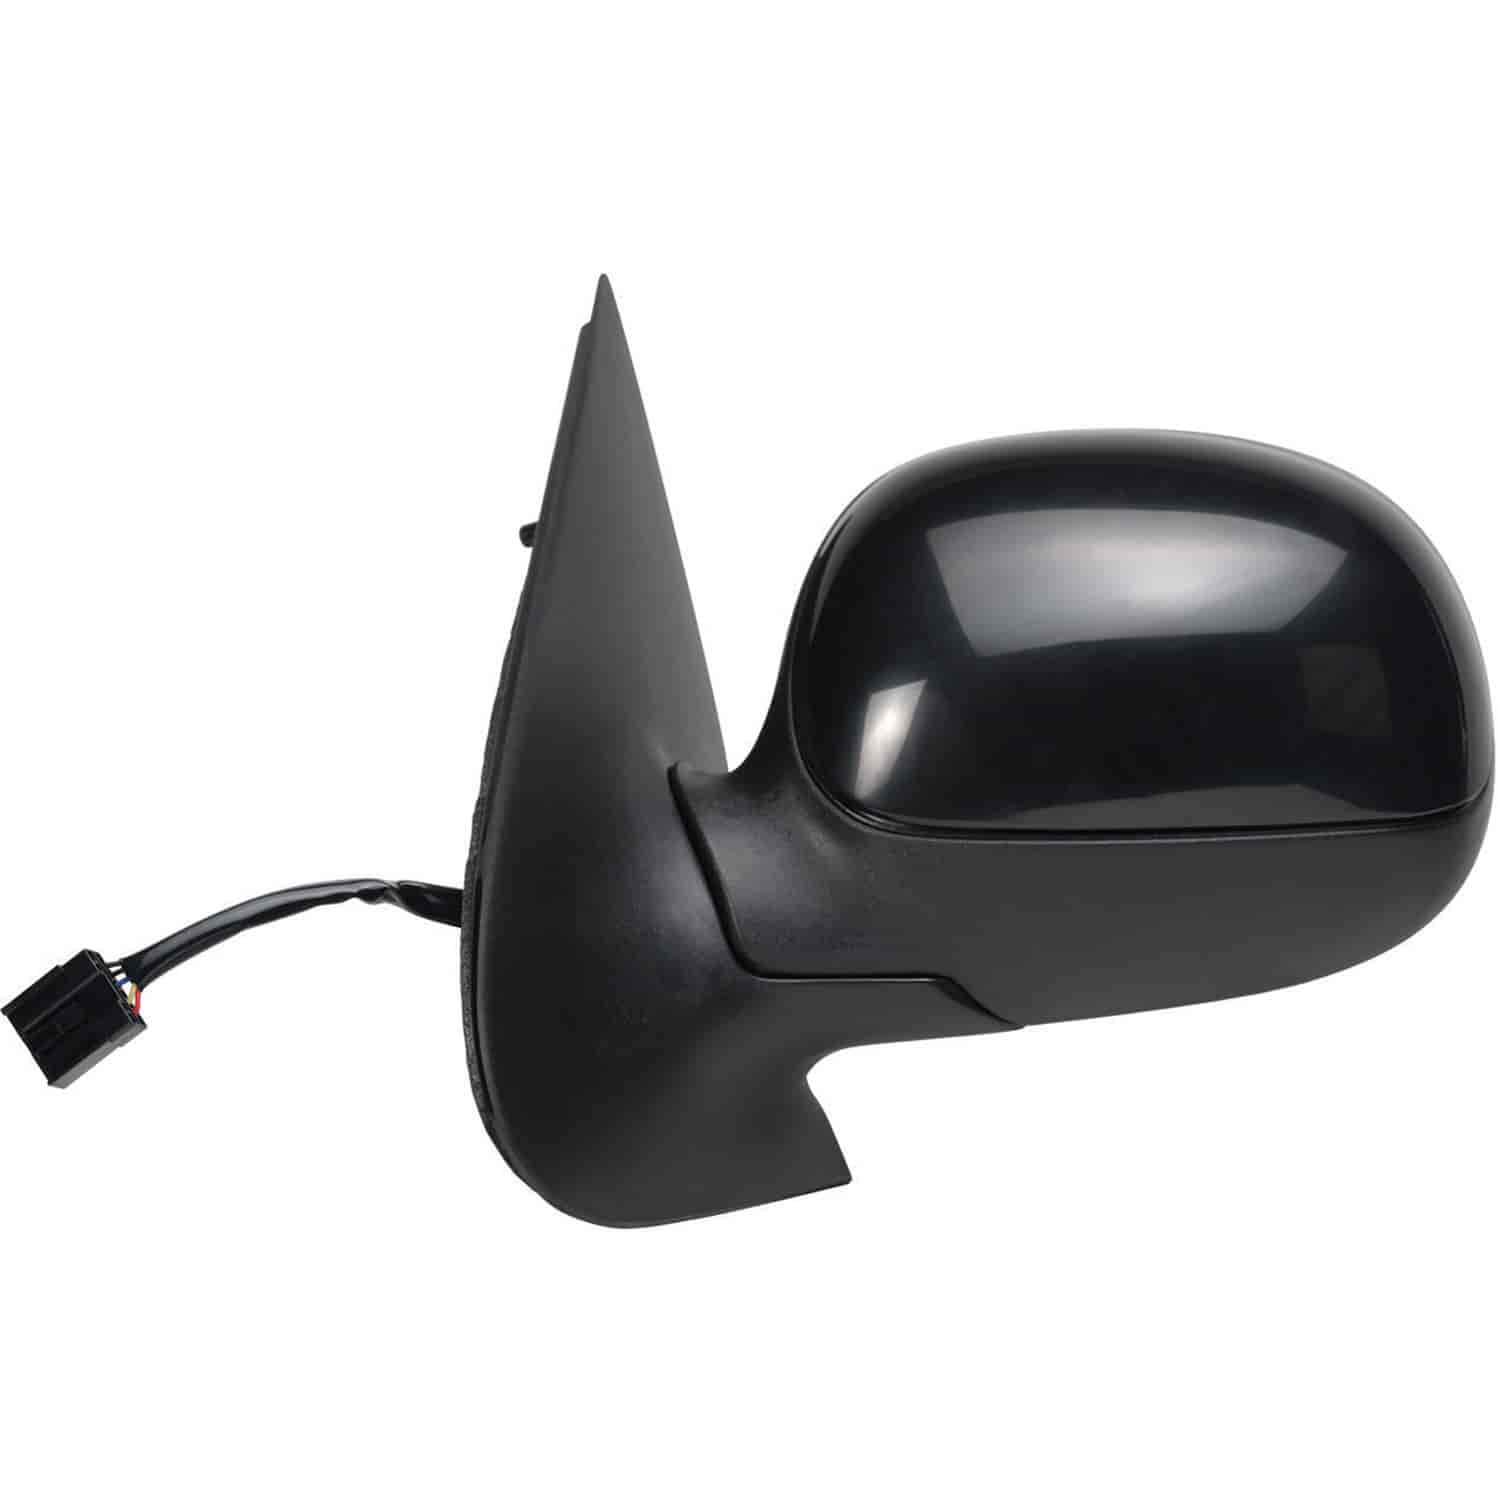 OEM Style Replacement mirror for 98-02 Exp/ Nav 98-03 F150/F250 LD Crew Cab driver side mirror teste